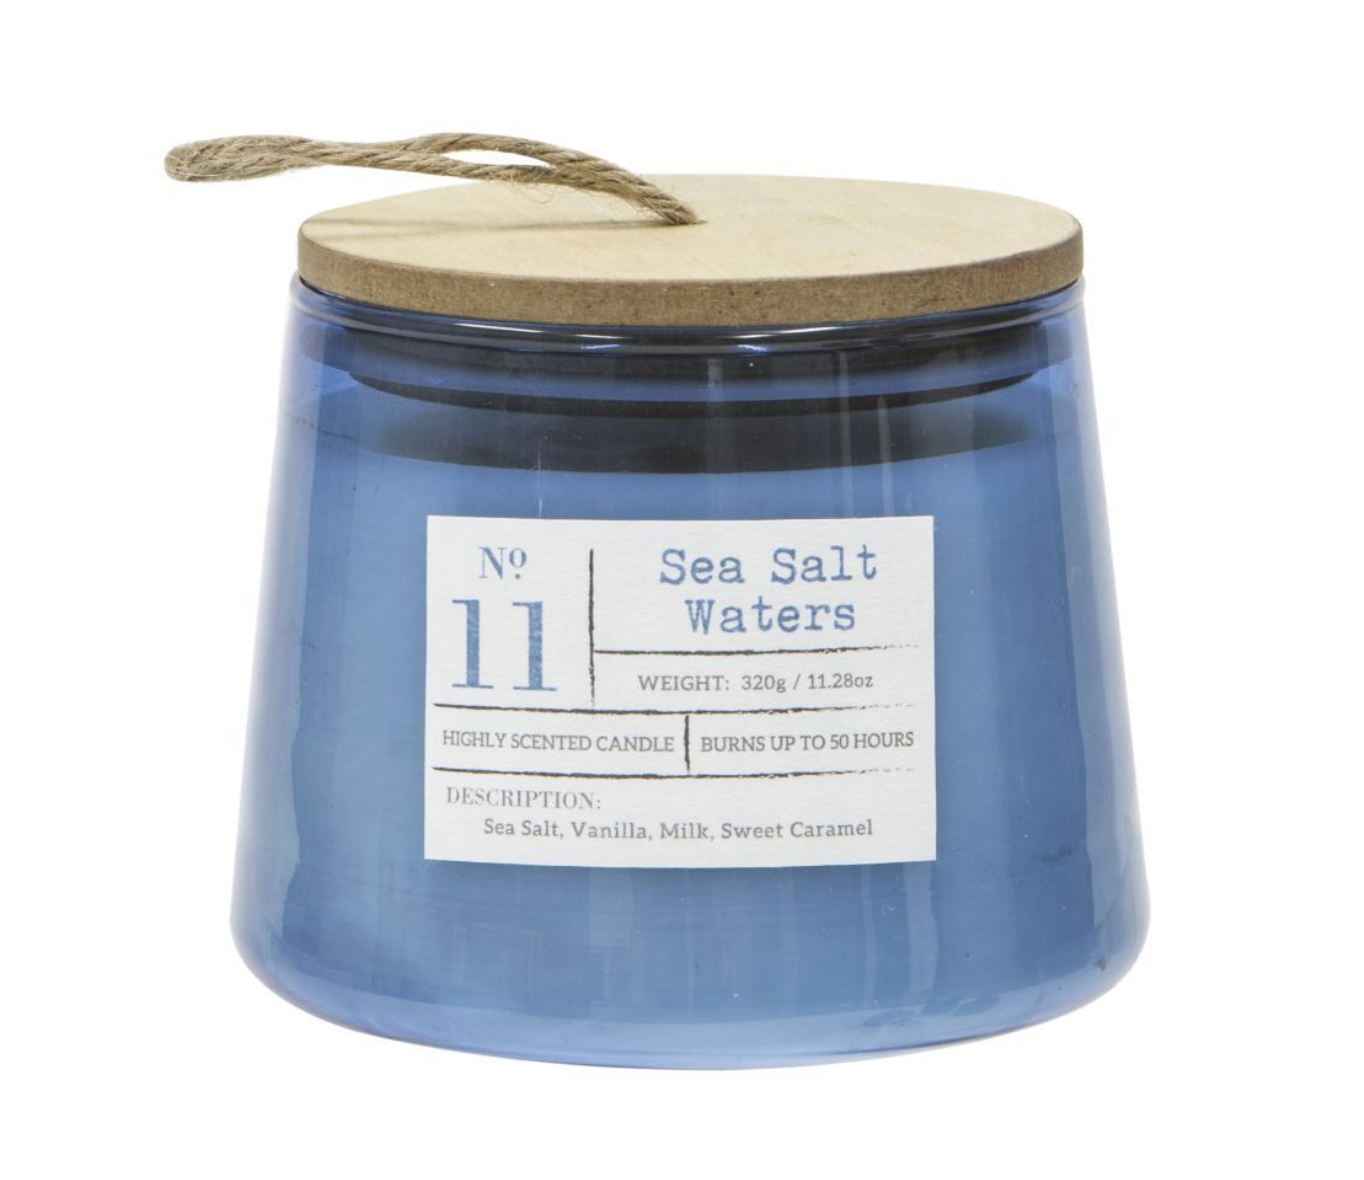 Salt Water Candle